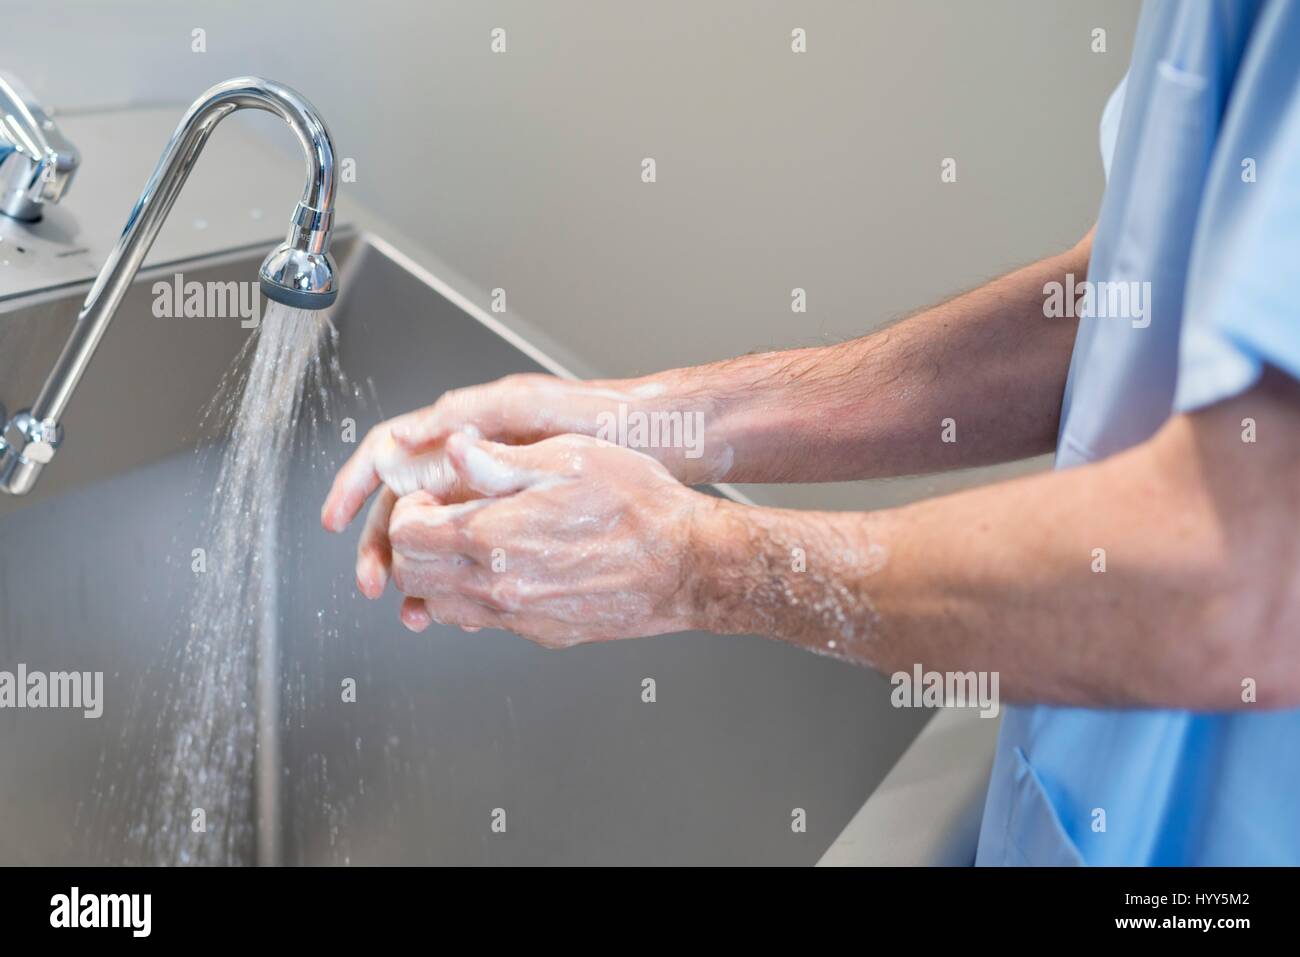 Doctor cleaning hands with soap and water in hospital. Stock Photo